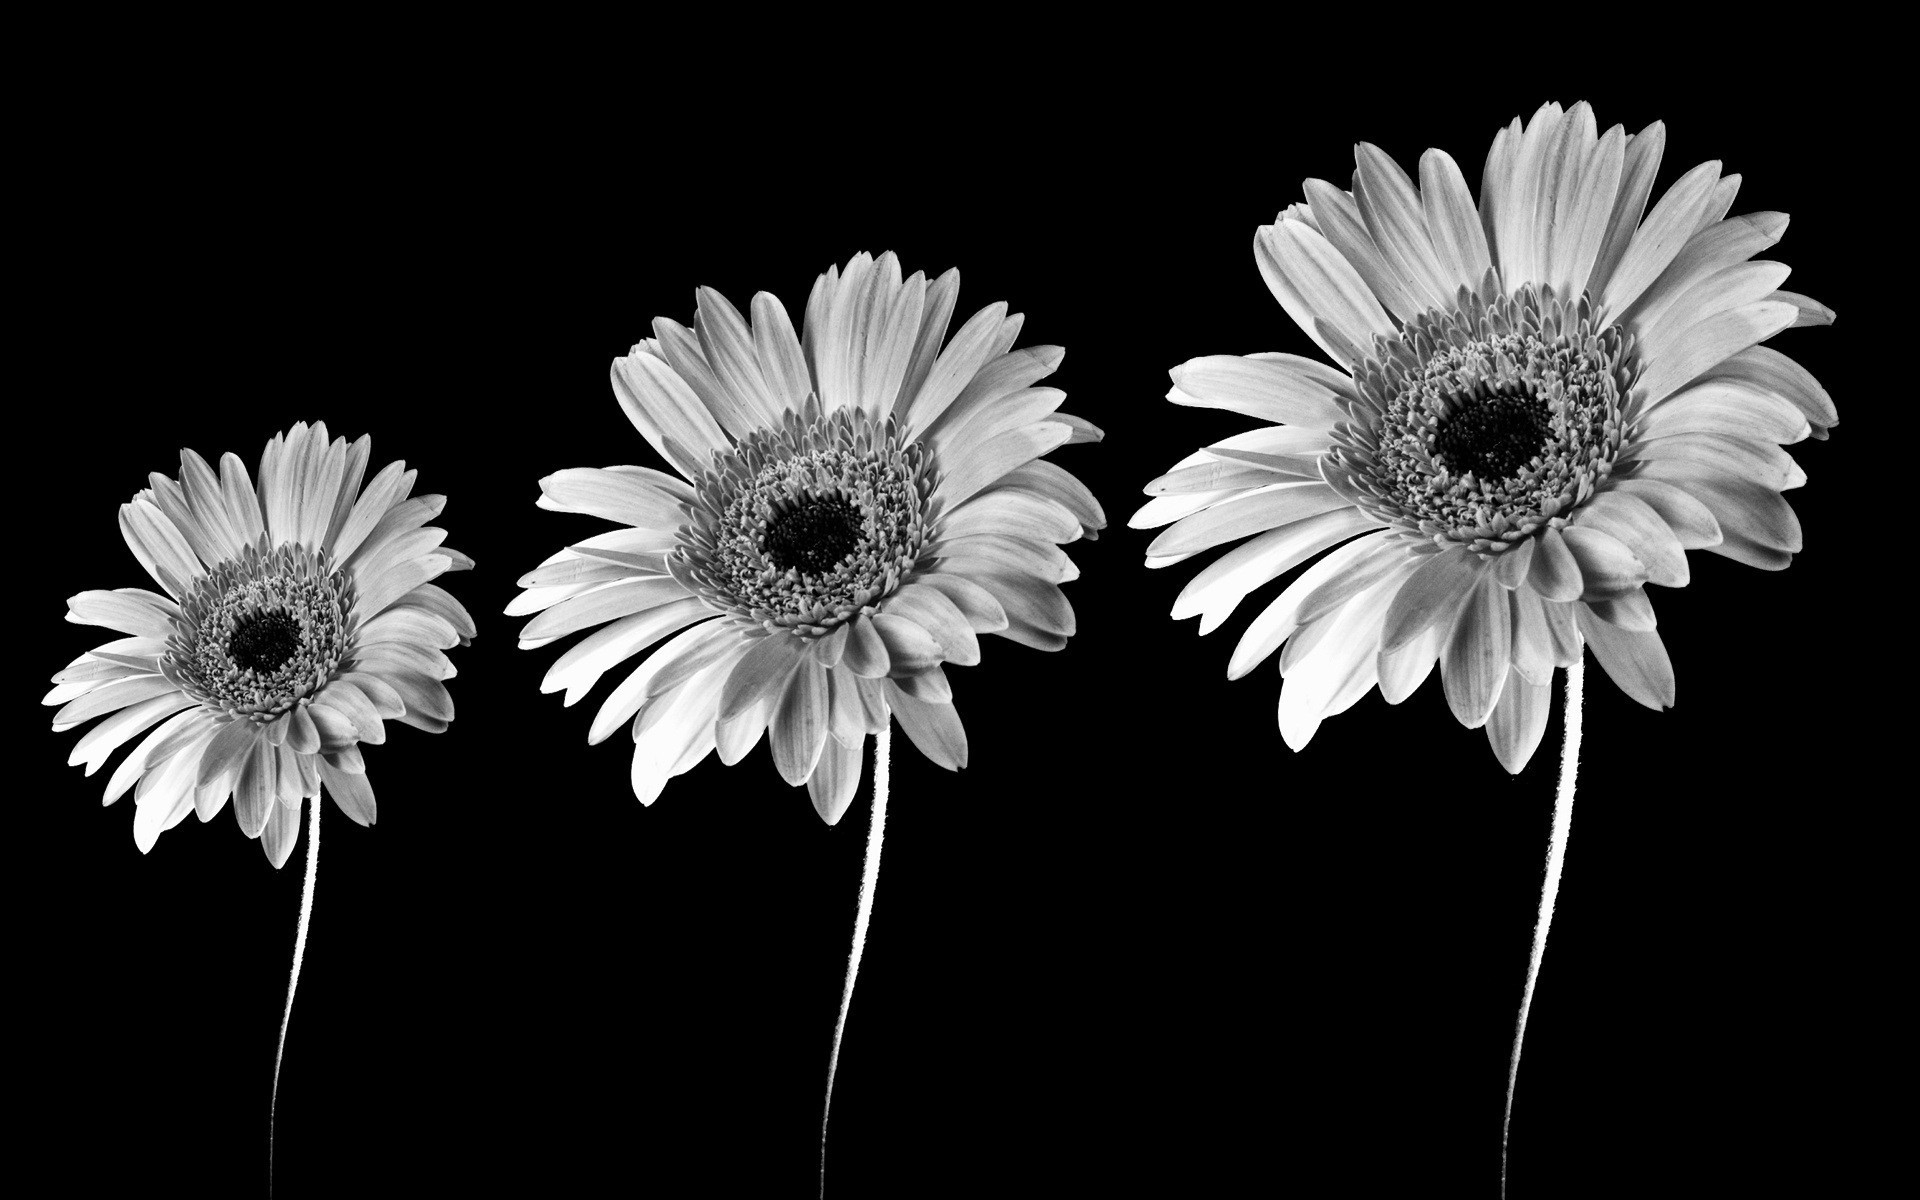 1920x1200 PreviousNext. Previous Image Next Image. black and white flower ...